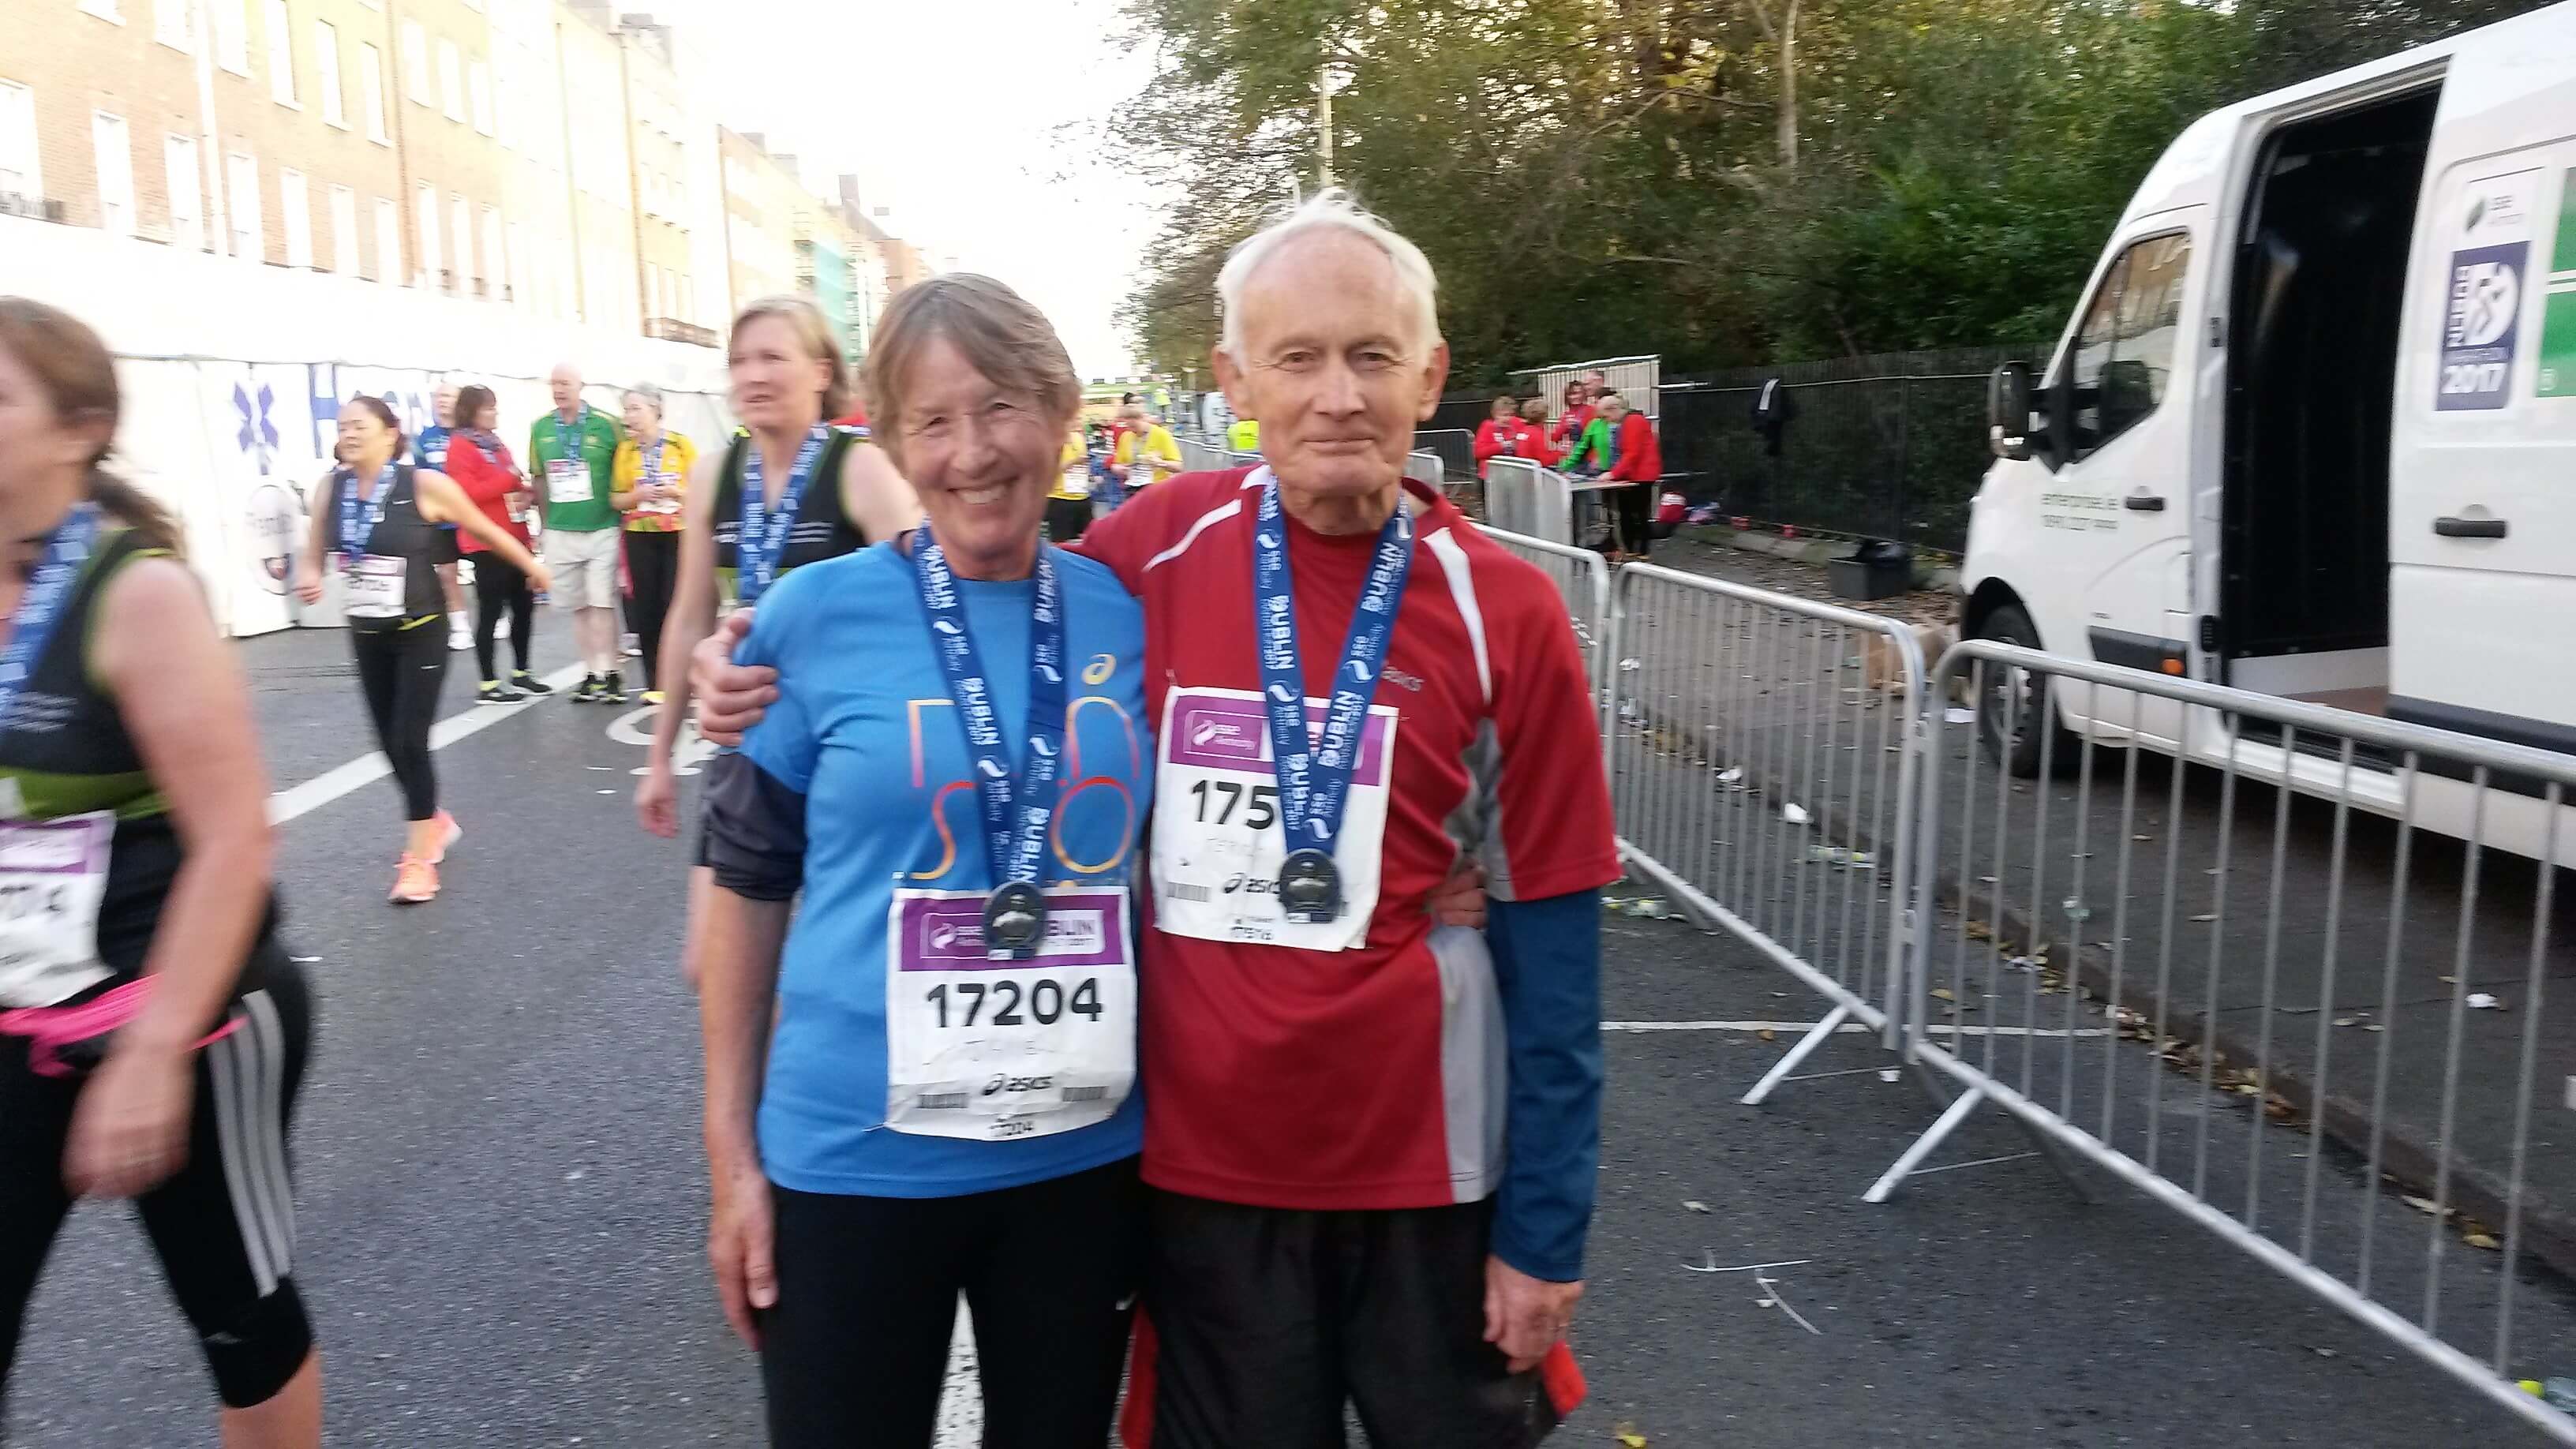 Jane and Terry Gibson at the finish of Dublin marathon 2017